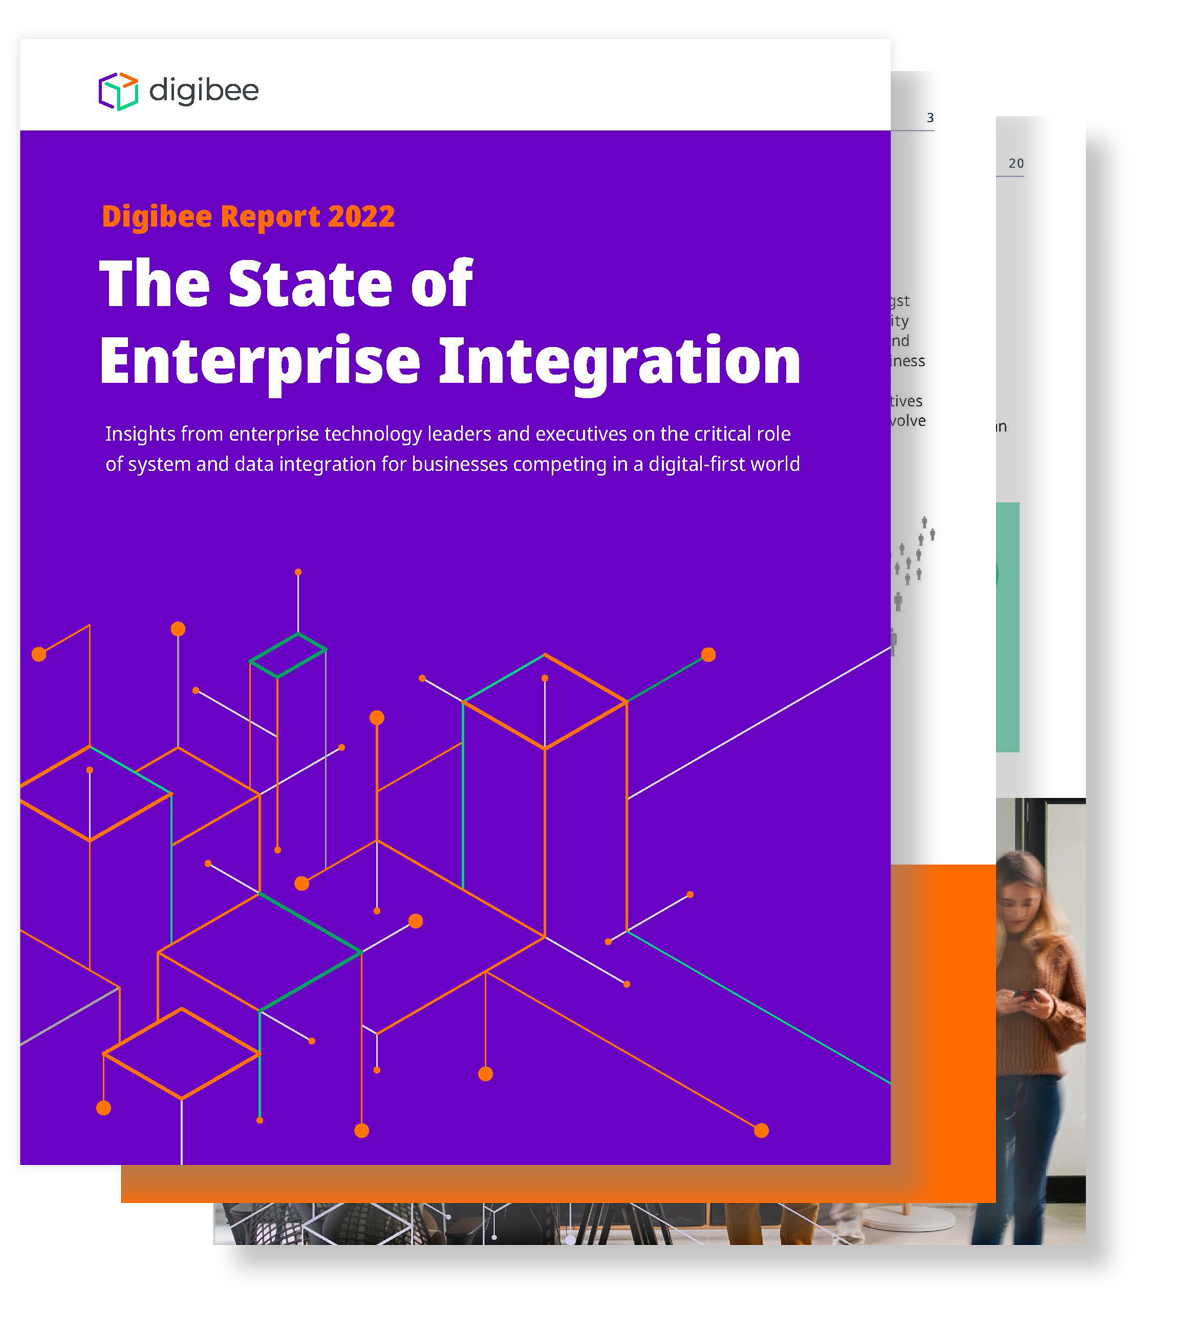 image-01-ebook-digibee-state-of-ei-report